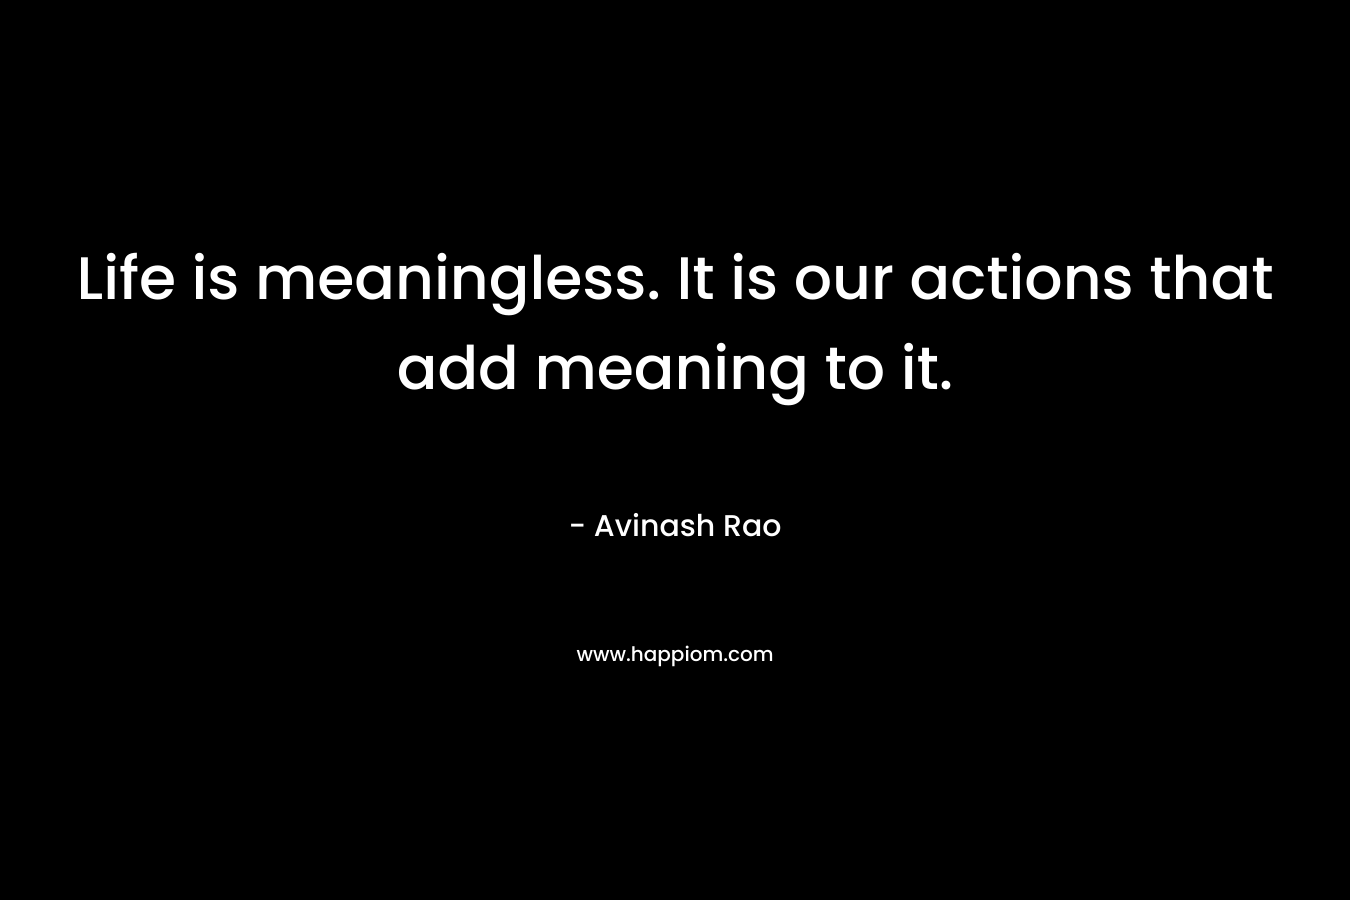 Life is meaningless. It is our actions that add meaning to it. – Avinash Rao